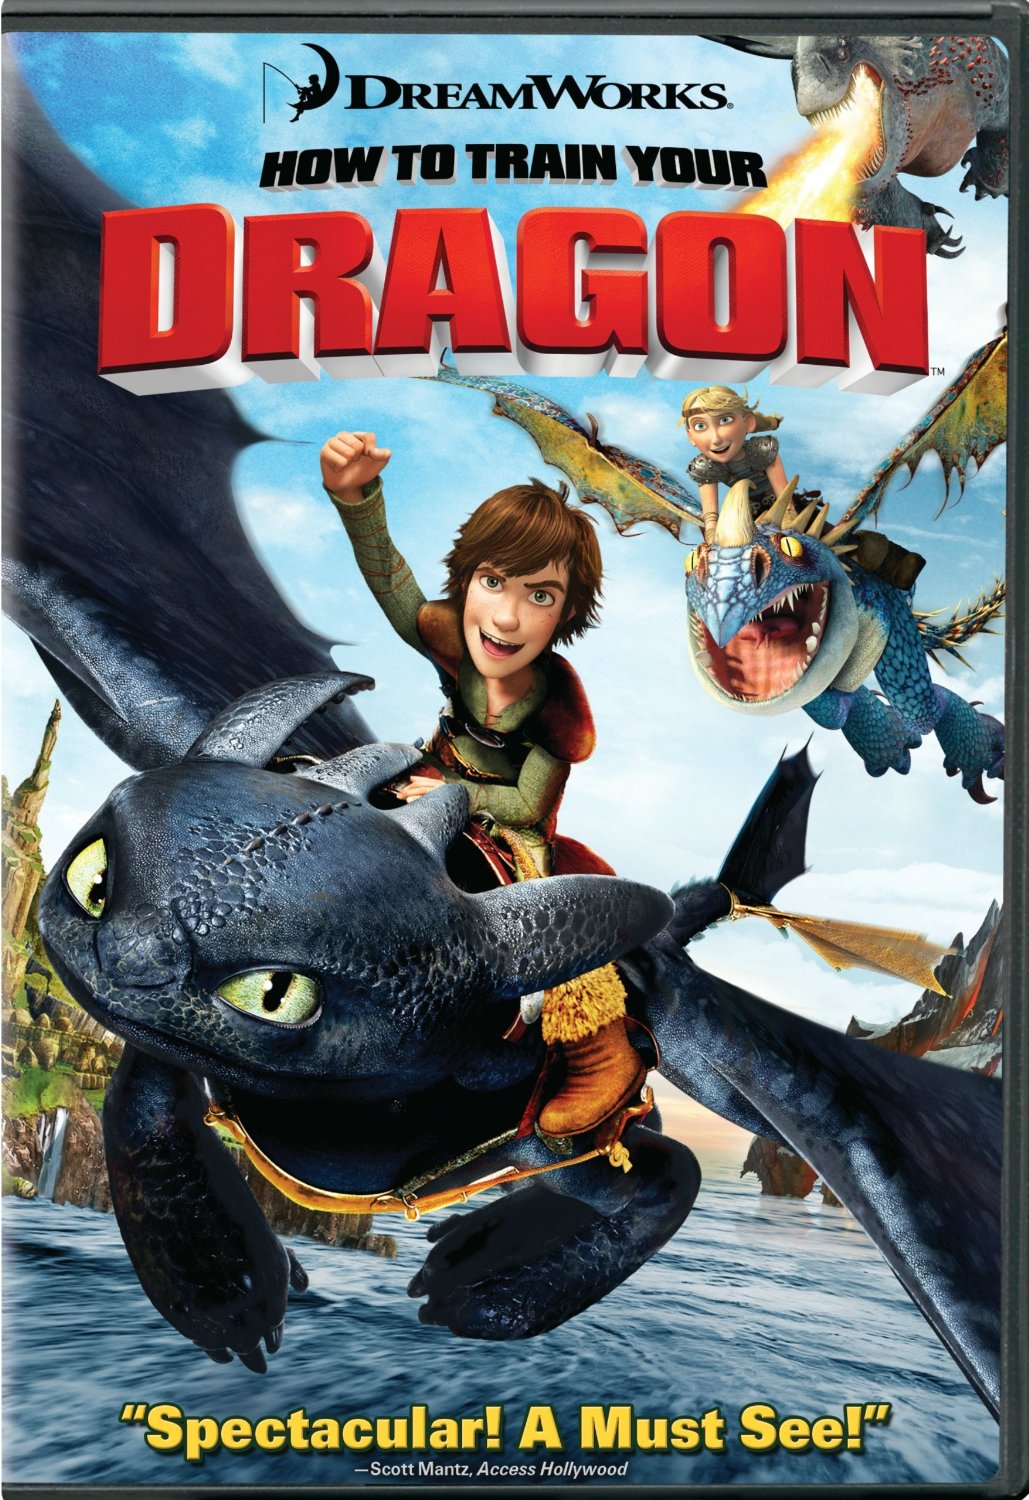 How To Train Your Dragon #1